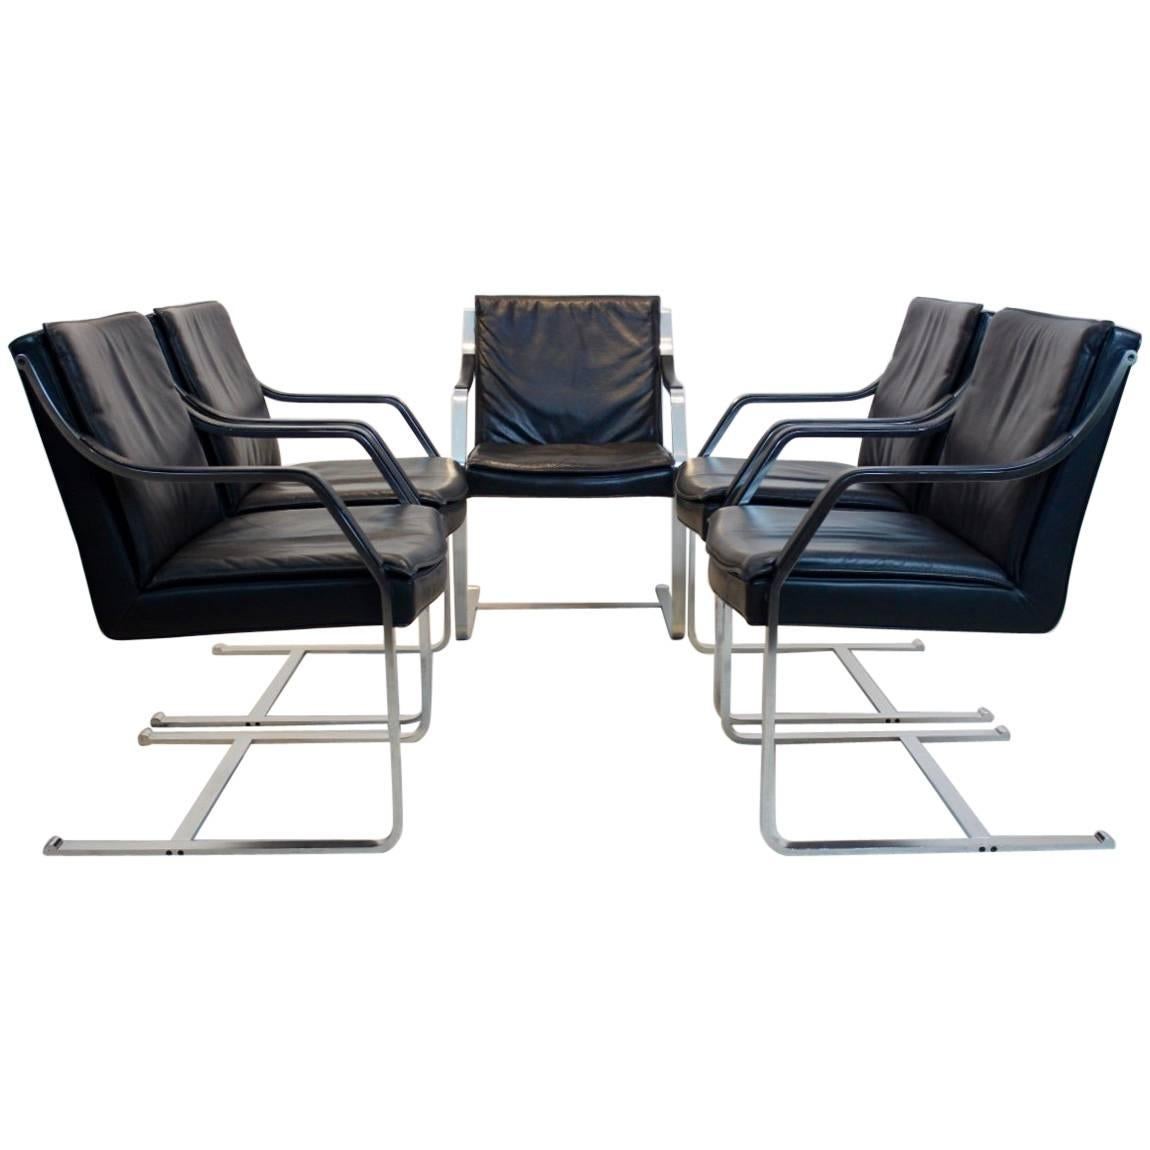 The graceful Art collection chair is an icon with a marvellous sit. Heavy stainless steel brushed frame with classic black leather upholstery. This cantilever chair was designed by Rudolf B. Glatzel in the 1980s for Walter Knoll as part of the Art